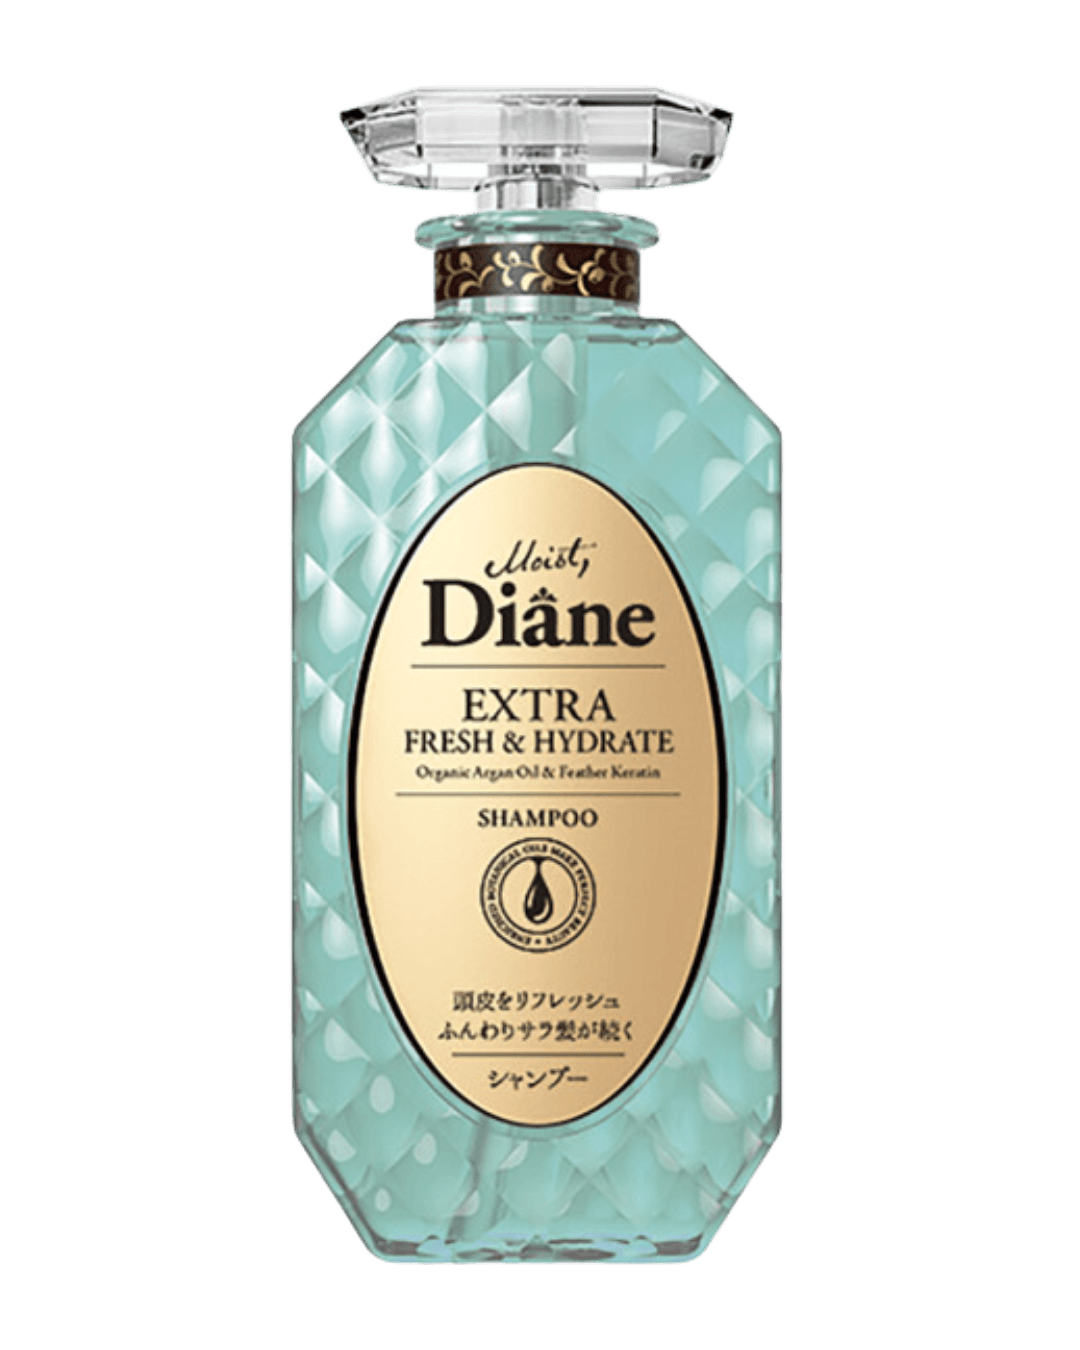 Daily Vanity Beauty Awards 2024 Best Hair care Moist Diane Extra Fresh &#038; Hydrate Shampoo Voted By Beauty Experts